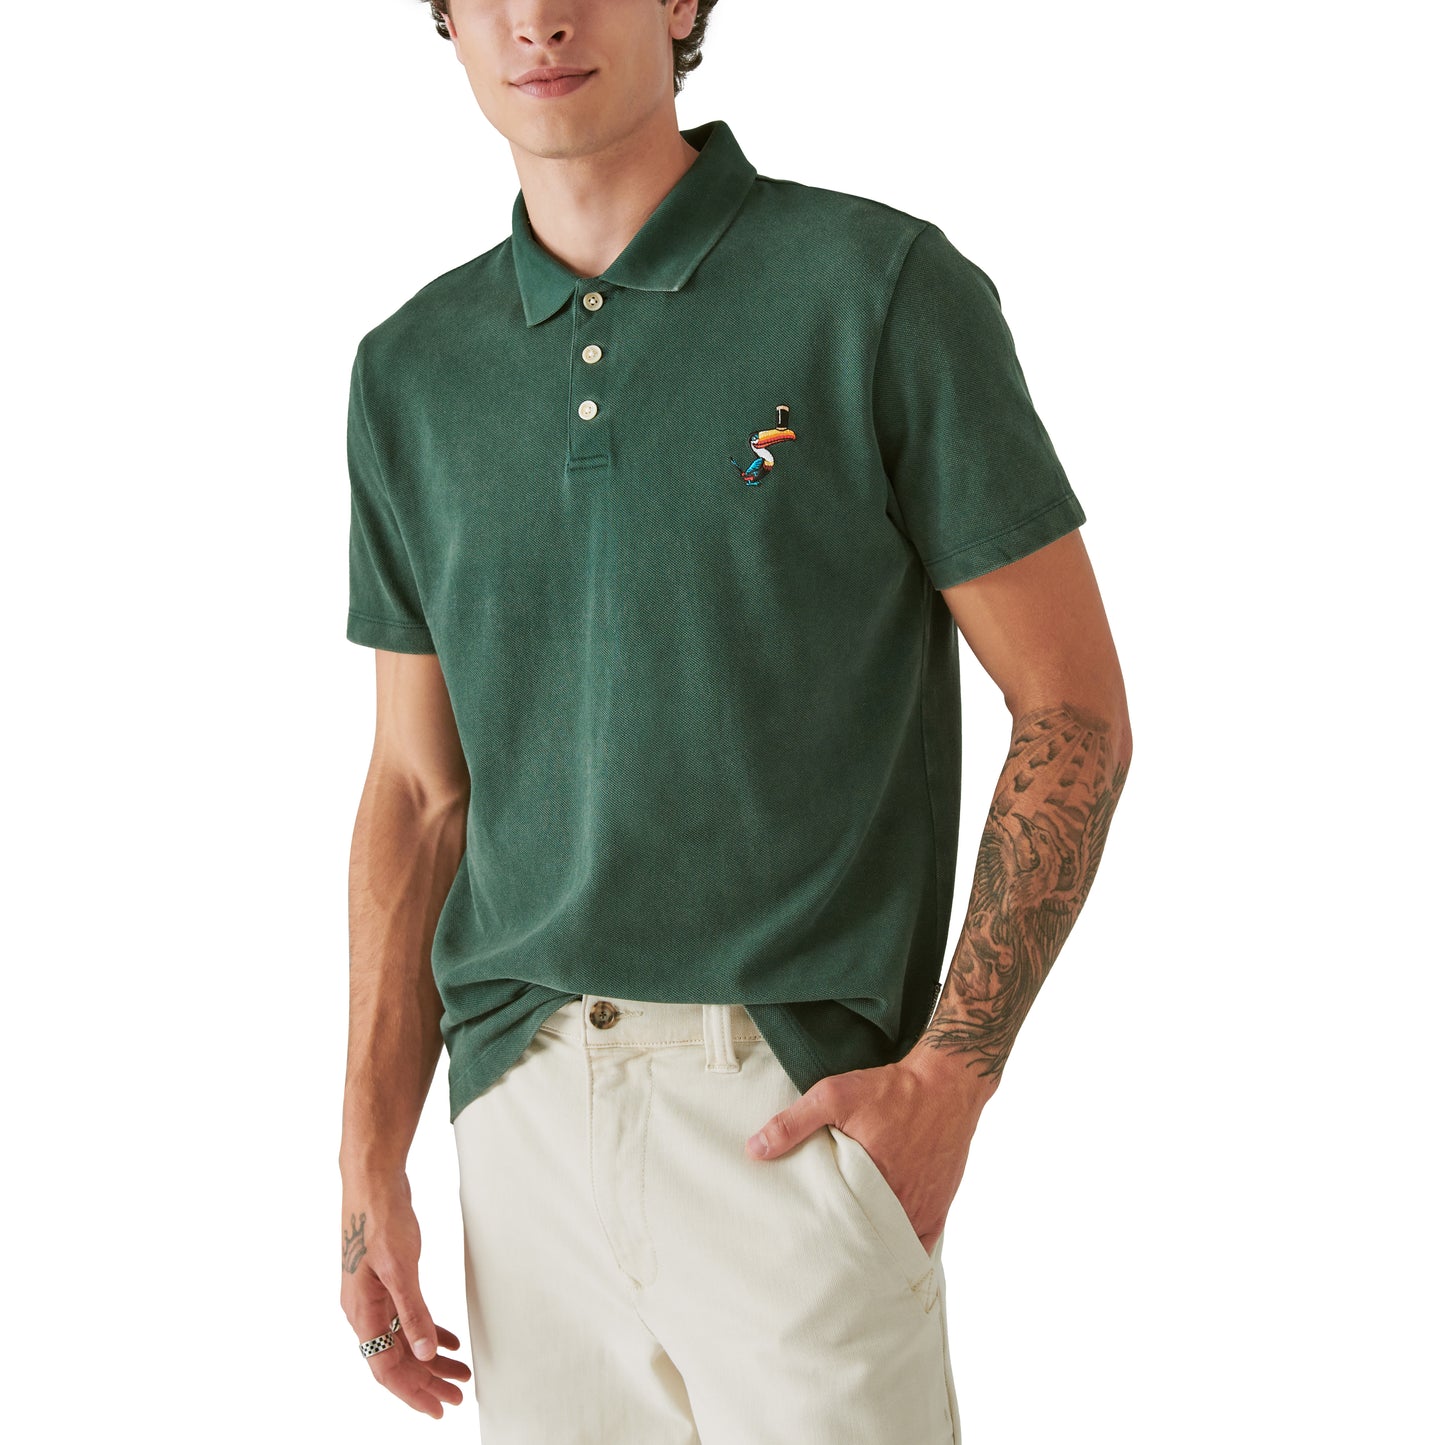 A man wearing a Guinness Polo - Pine Grove shirt from Guinness Webstore US.